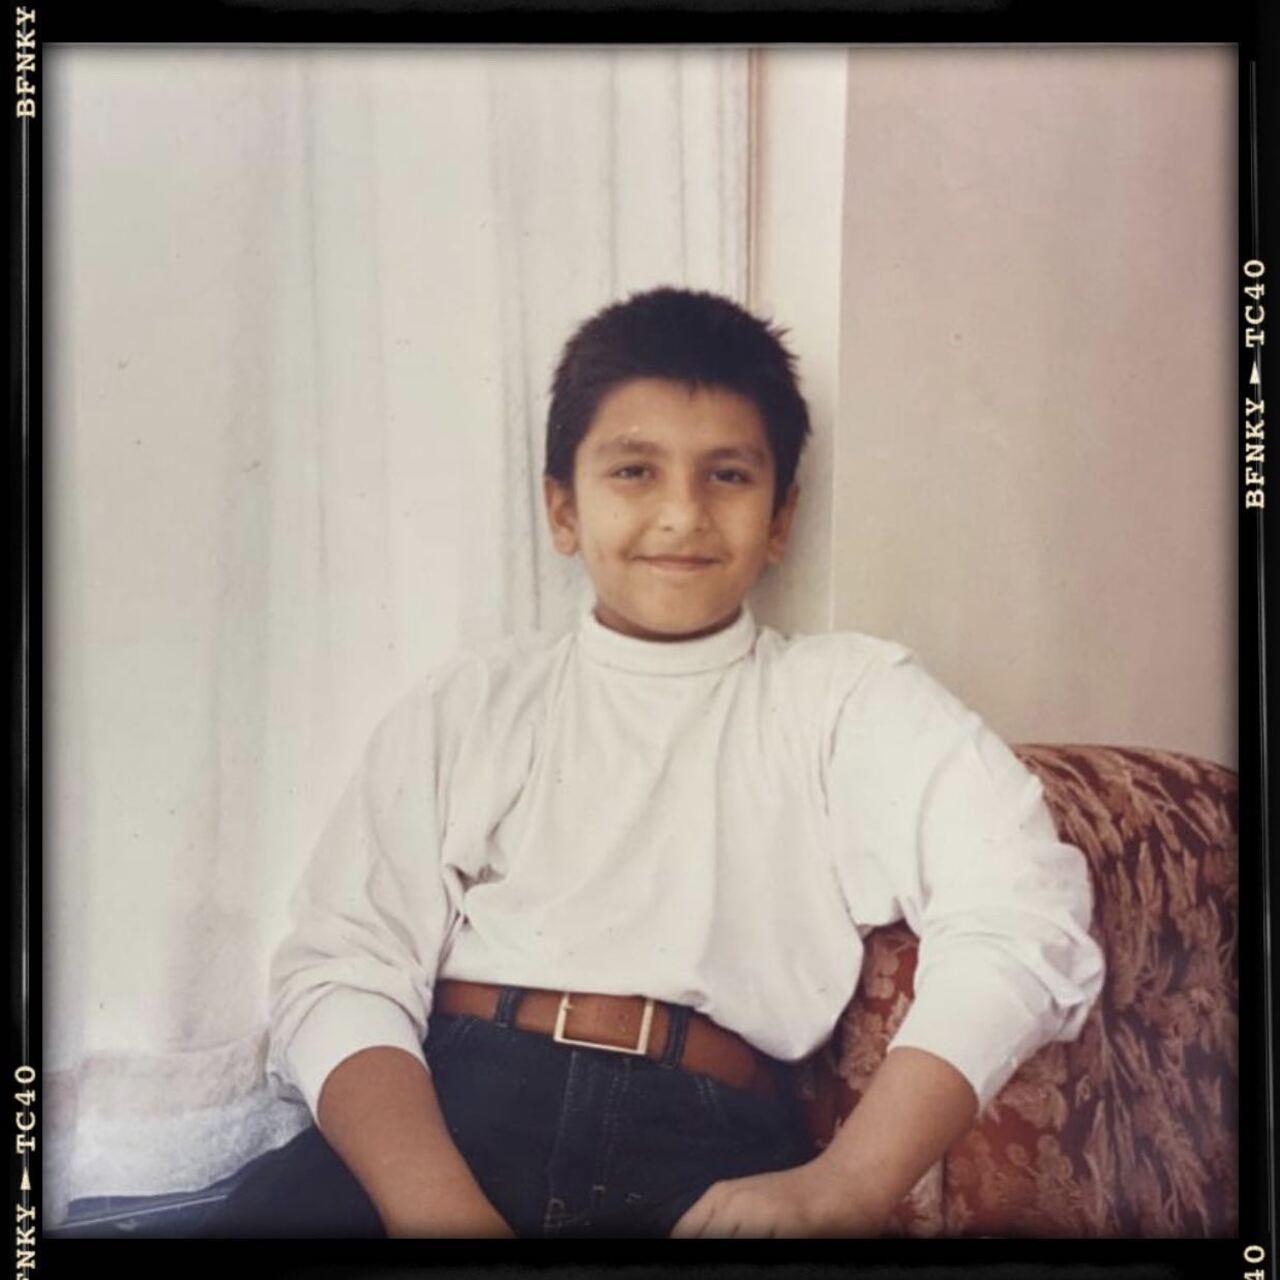 Ranveer Singh believed in being sajjan and stylish when he was young.